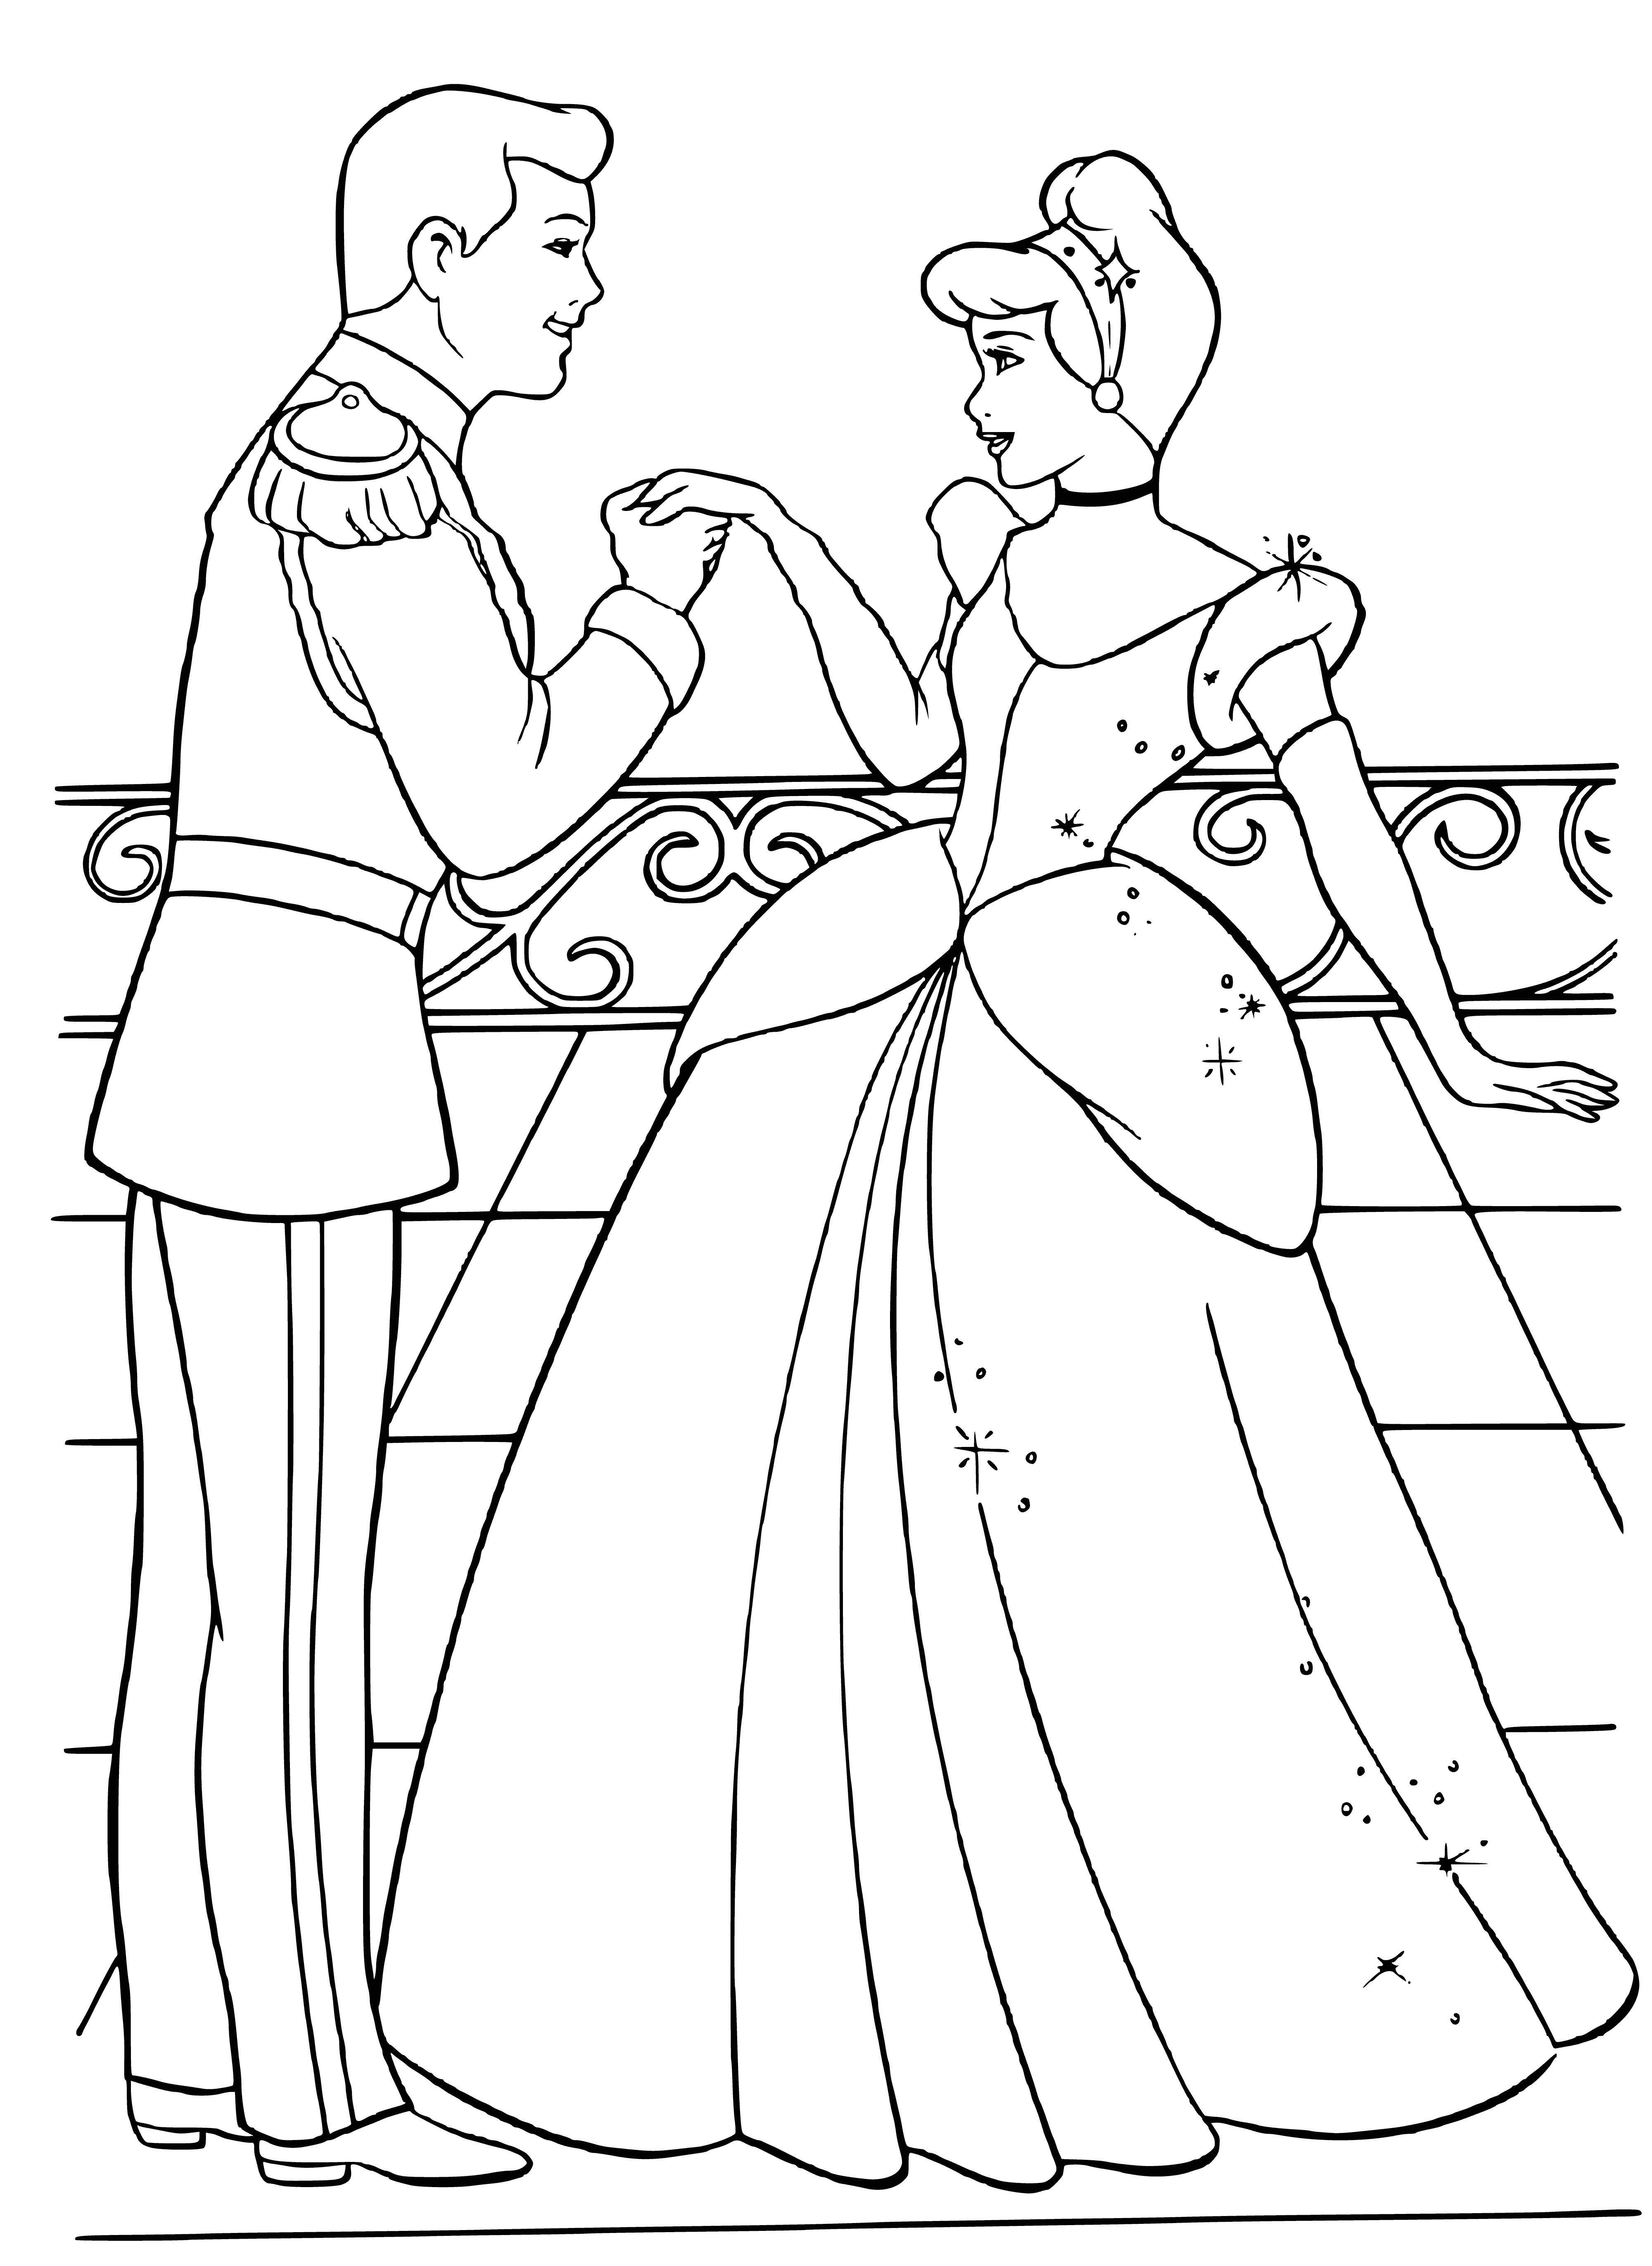 coloring page: She stands in a flowing dress, smiling at him as he looks on with intrigue - a pumpkin sits at her feet. #fall #seasons